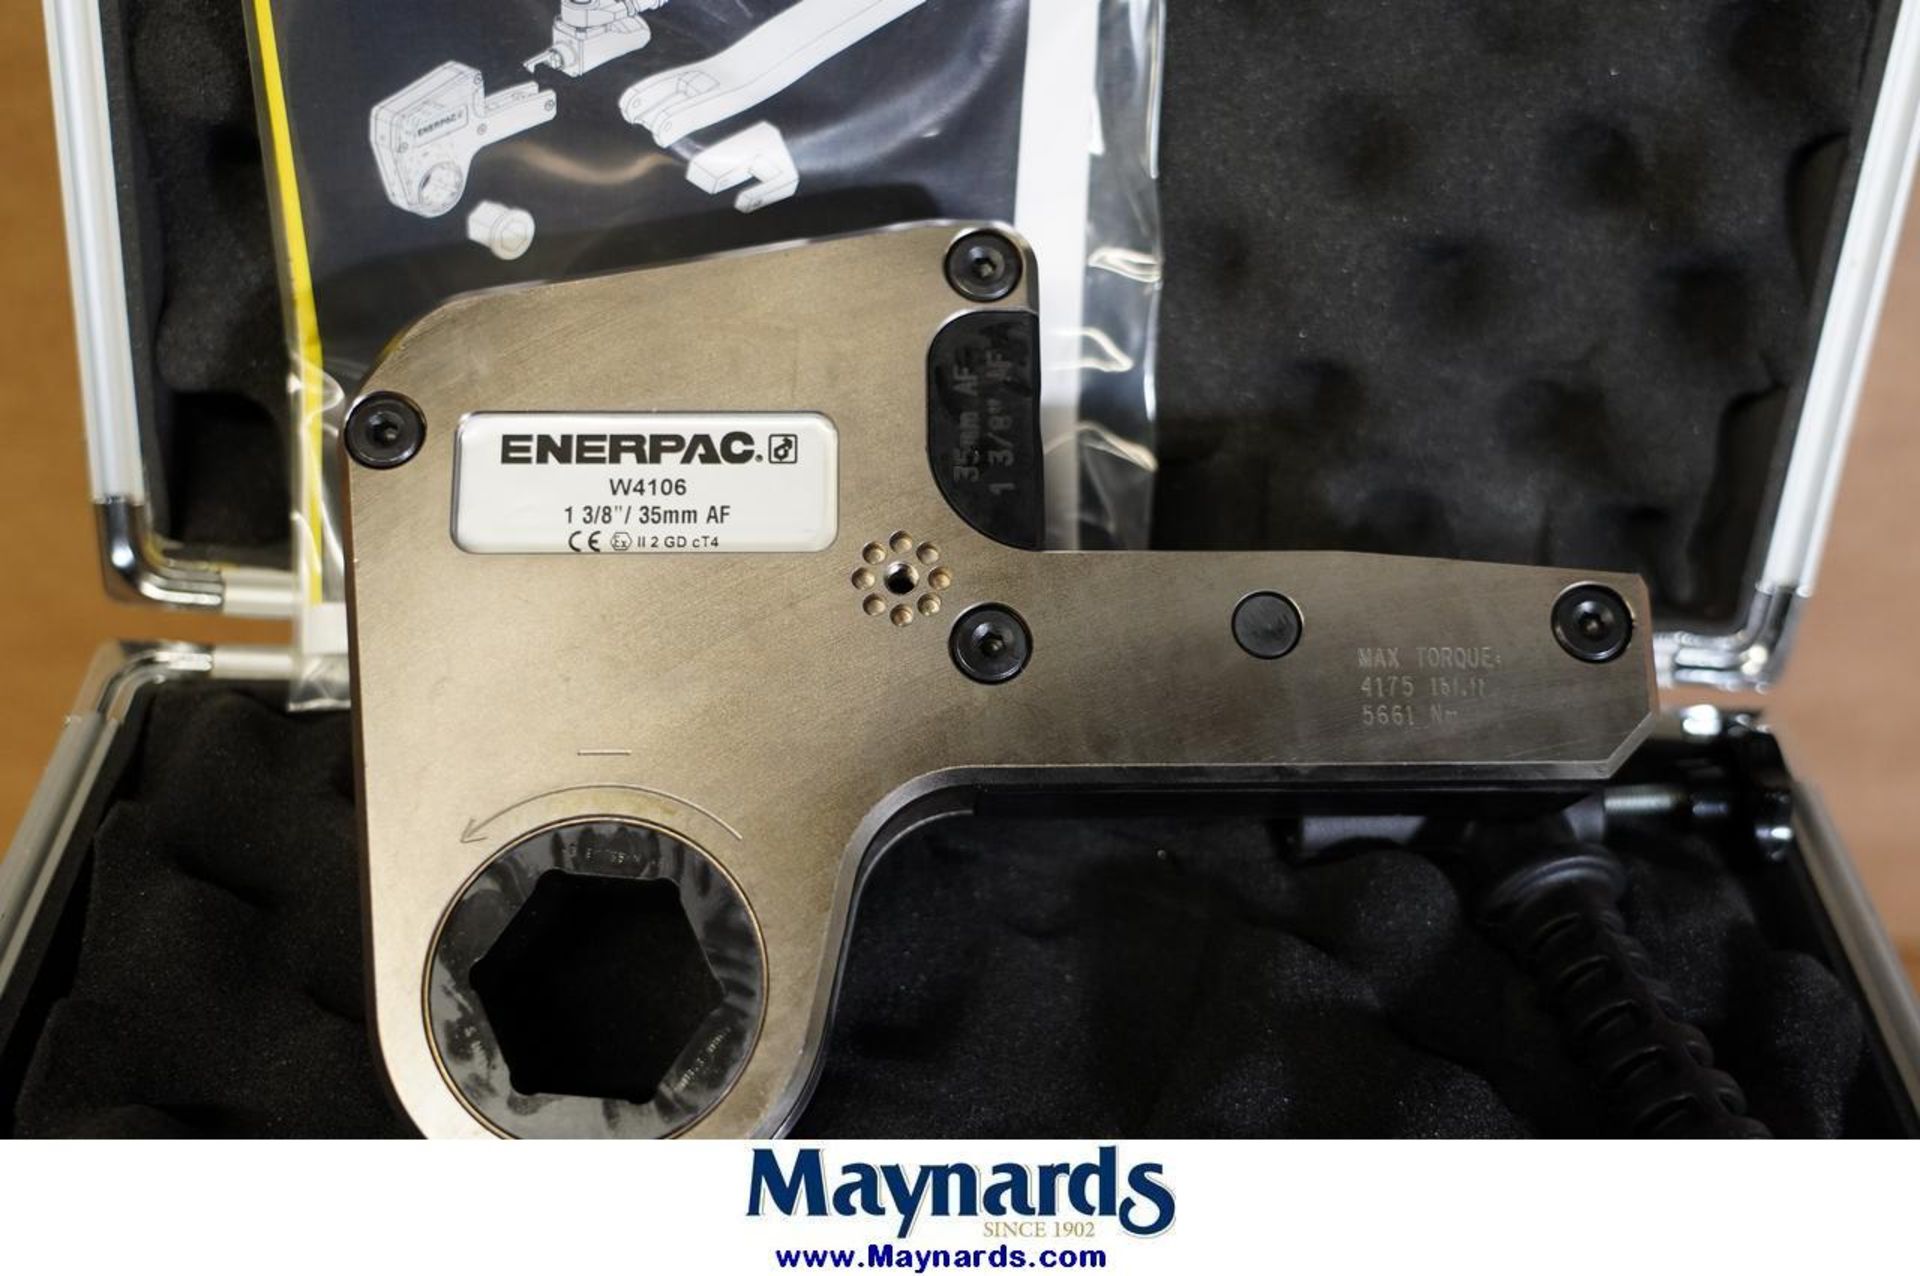 Enerpac W4106X W4000X Imperial or Metric Cassette - Image 2 of 5